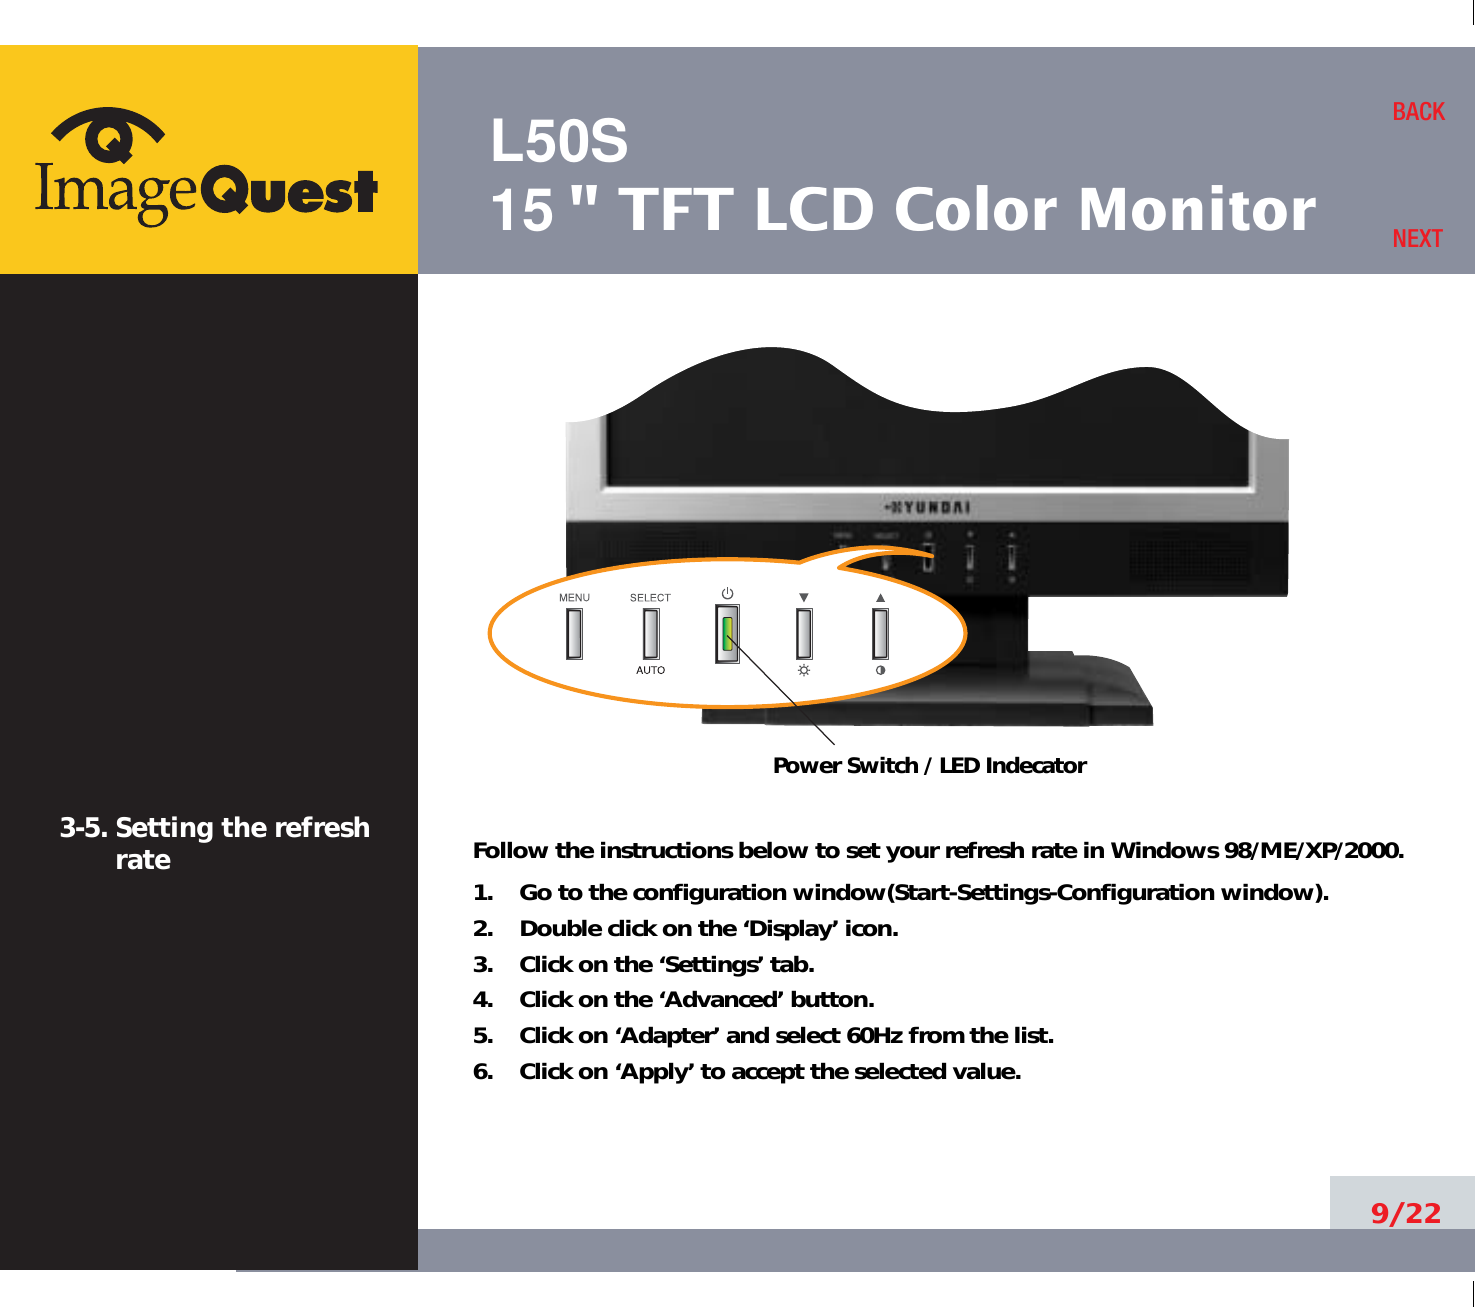 L50S15&quot; TFT LCD Color Monitor9/22BACKNEXT3-5. Setting the refreshrate Follow the instructions below to set your refresh rate in Windows 98/ME/XP/2000.1.    Go to the configuration window(Start-Settings-Configuration window).2.    Double click on the ‘Display’ icon.3.    Click on the ‘Settings’ tab.4.    Click on the ‘Advanced’ button.5.    Click on ‘Adapter’ and select 60Hz from the list.6.    Click on ‘Apply’ to accept the selected value.Power Switch / LED Indecator